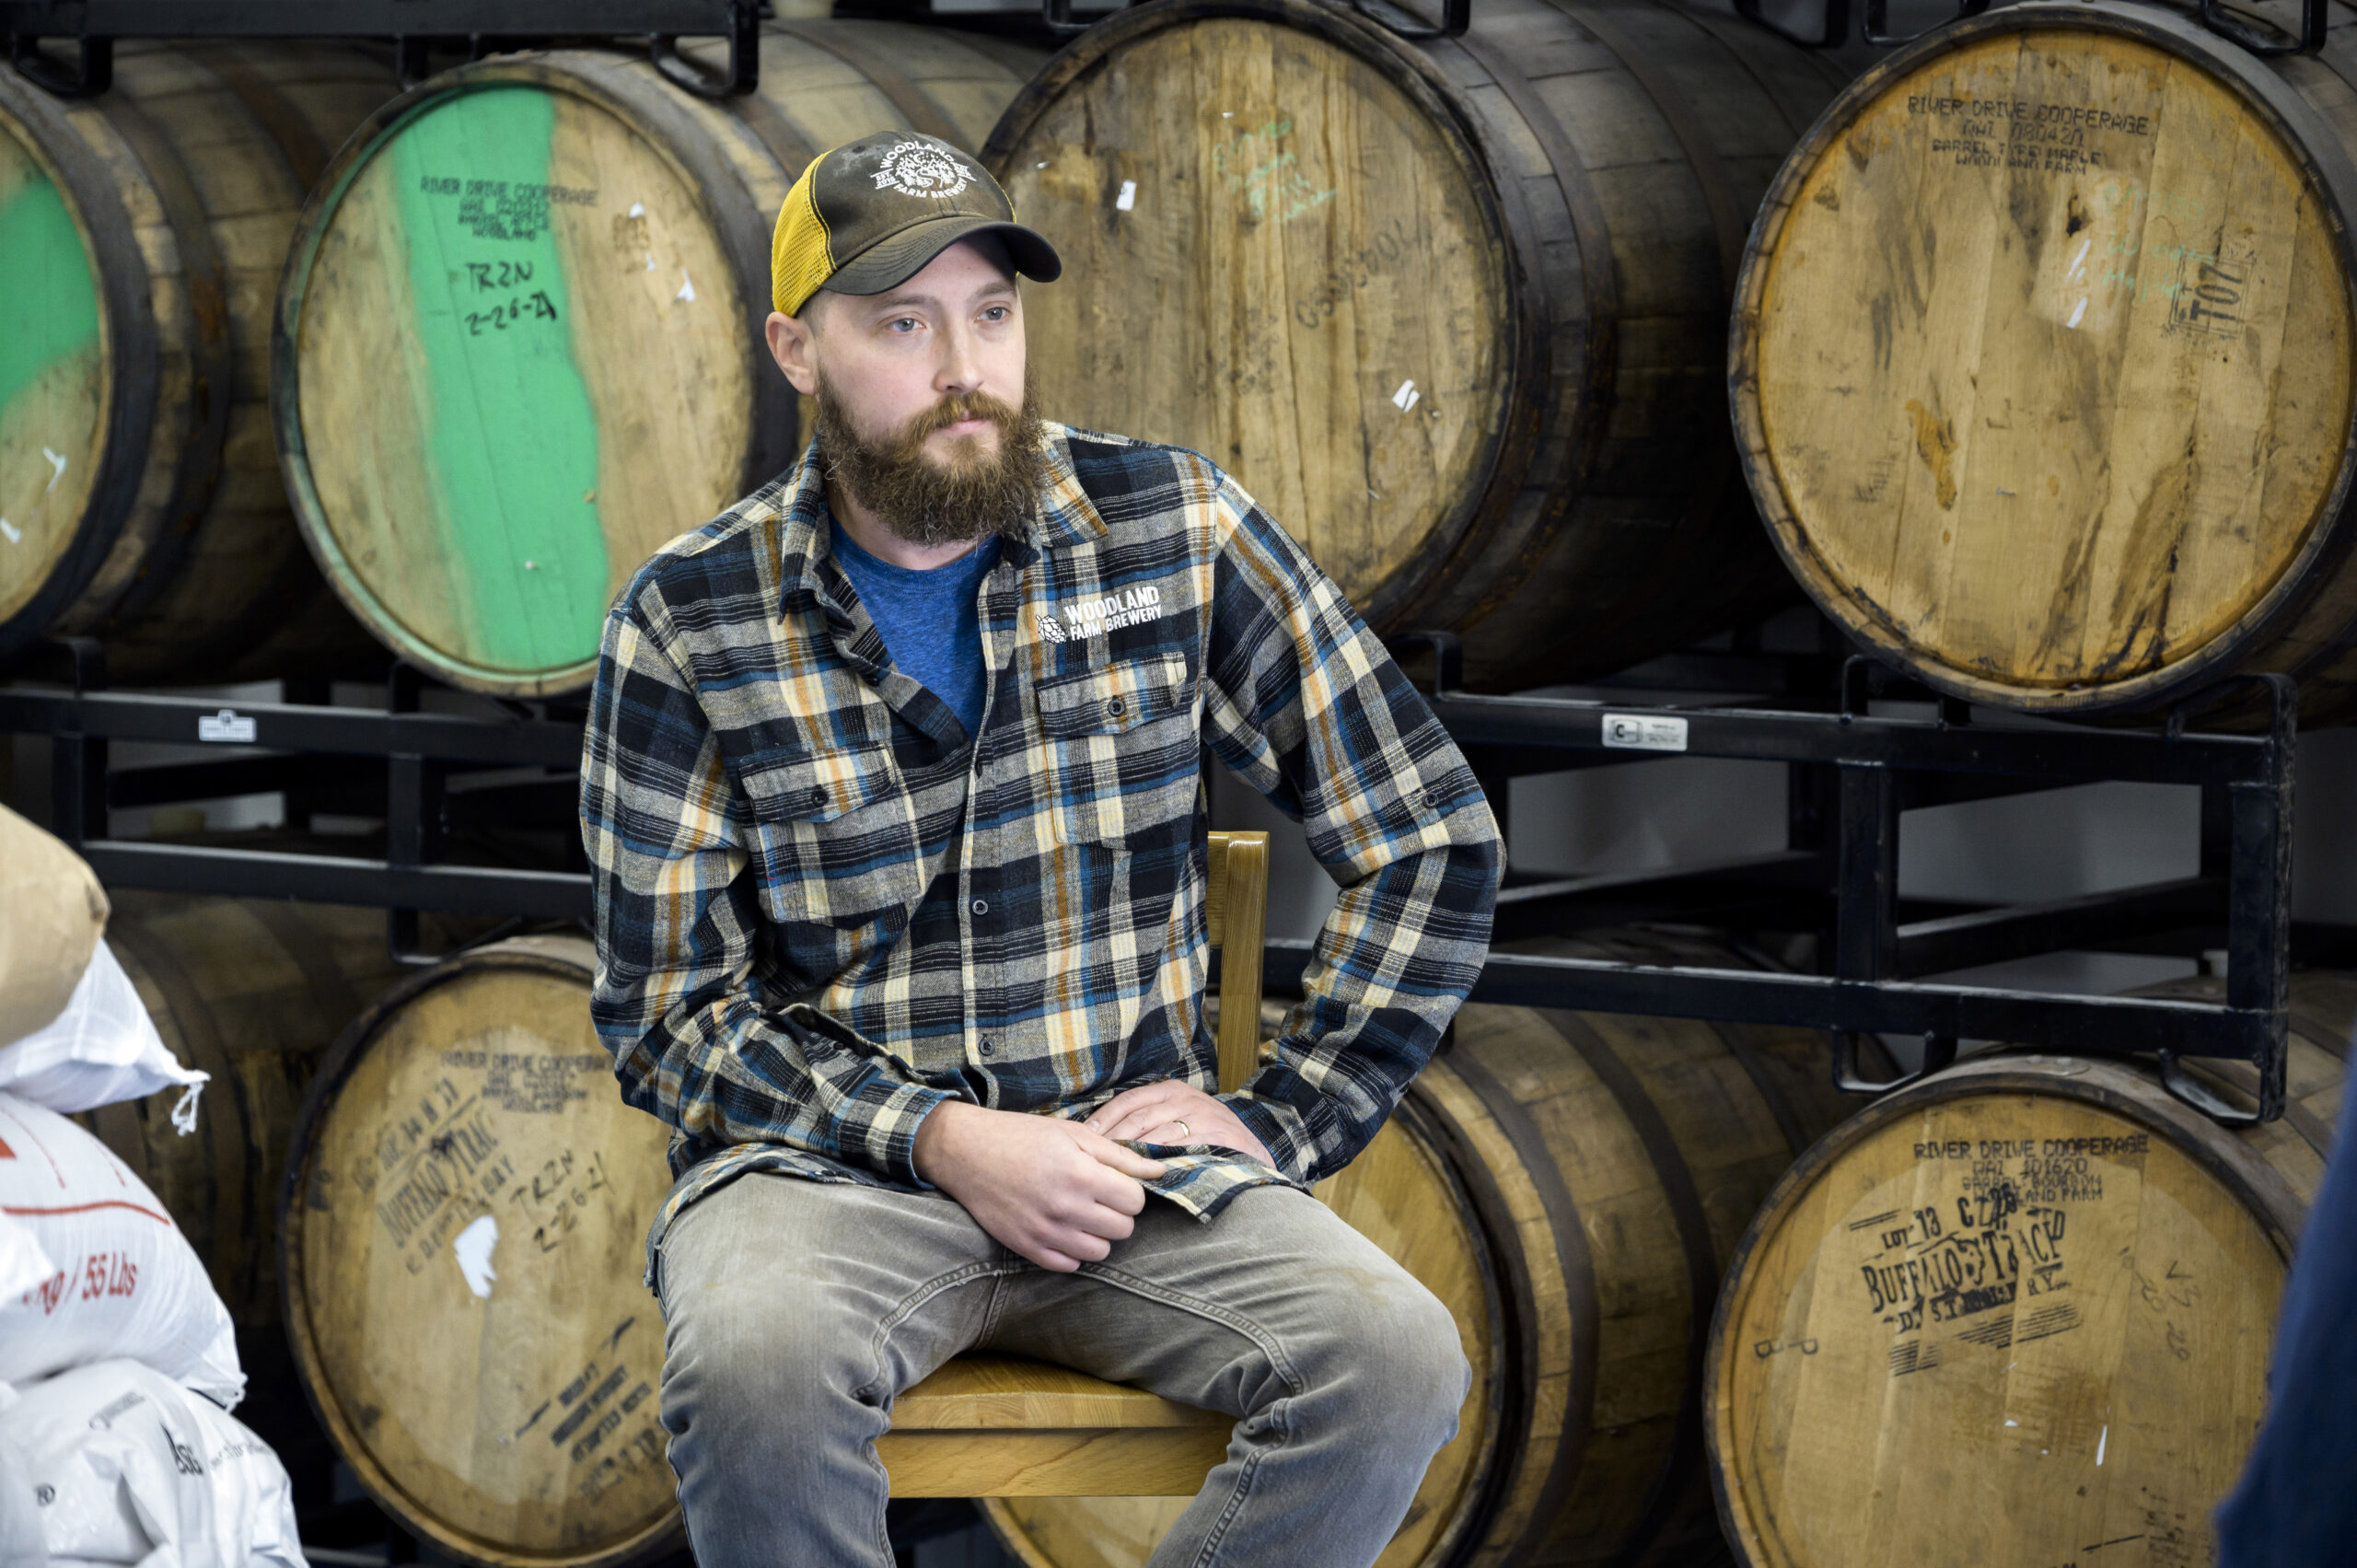 Man Sitting in front of barrels